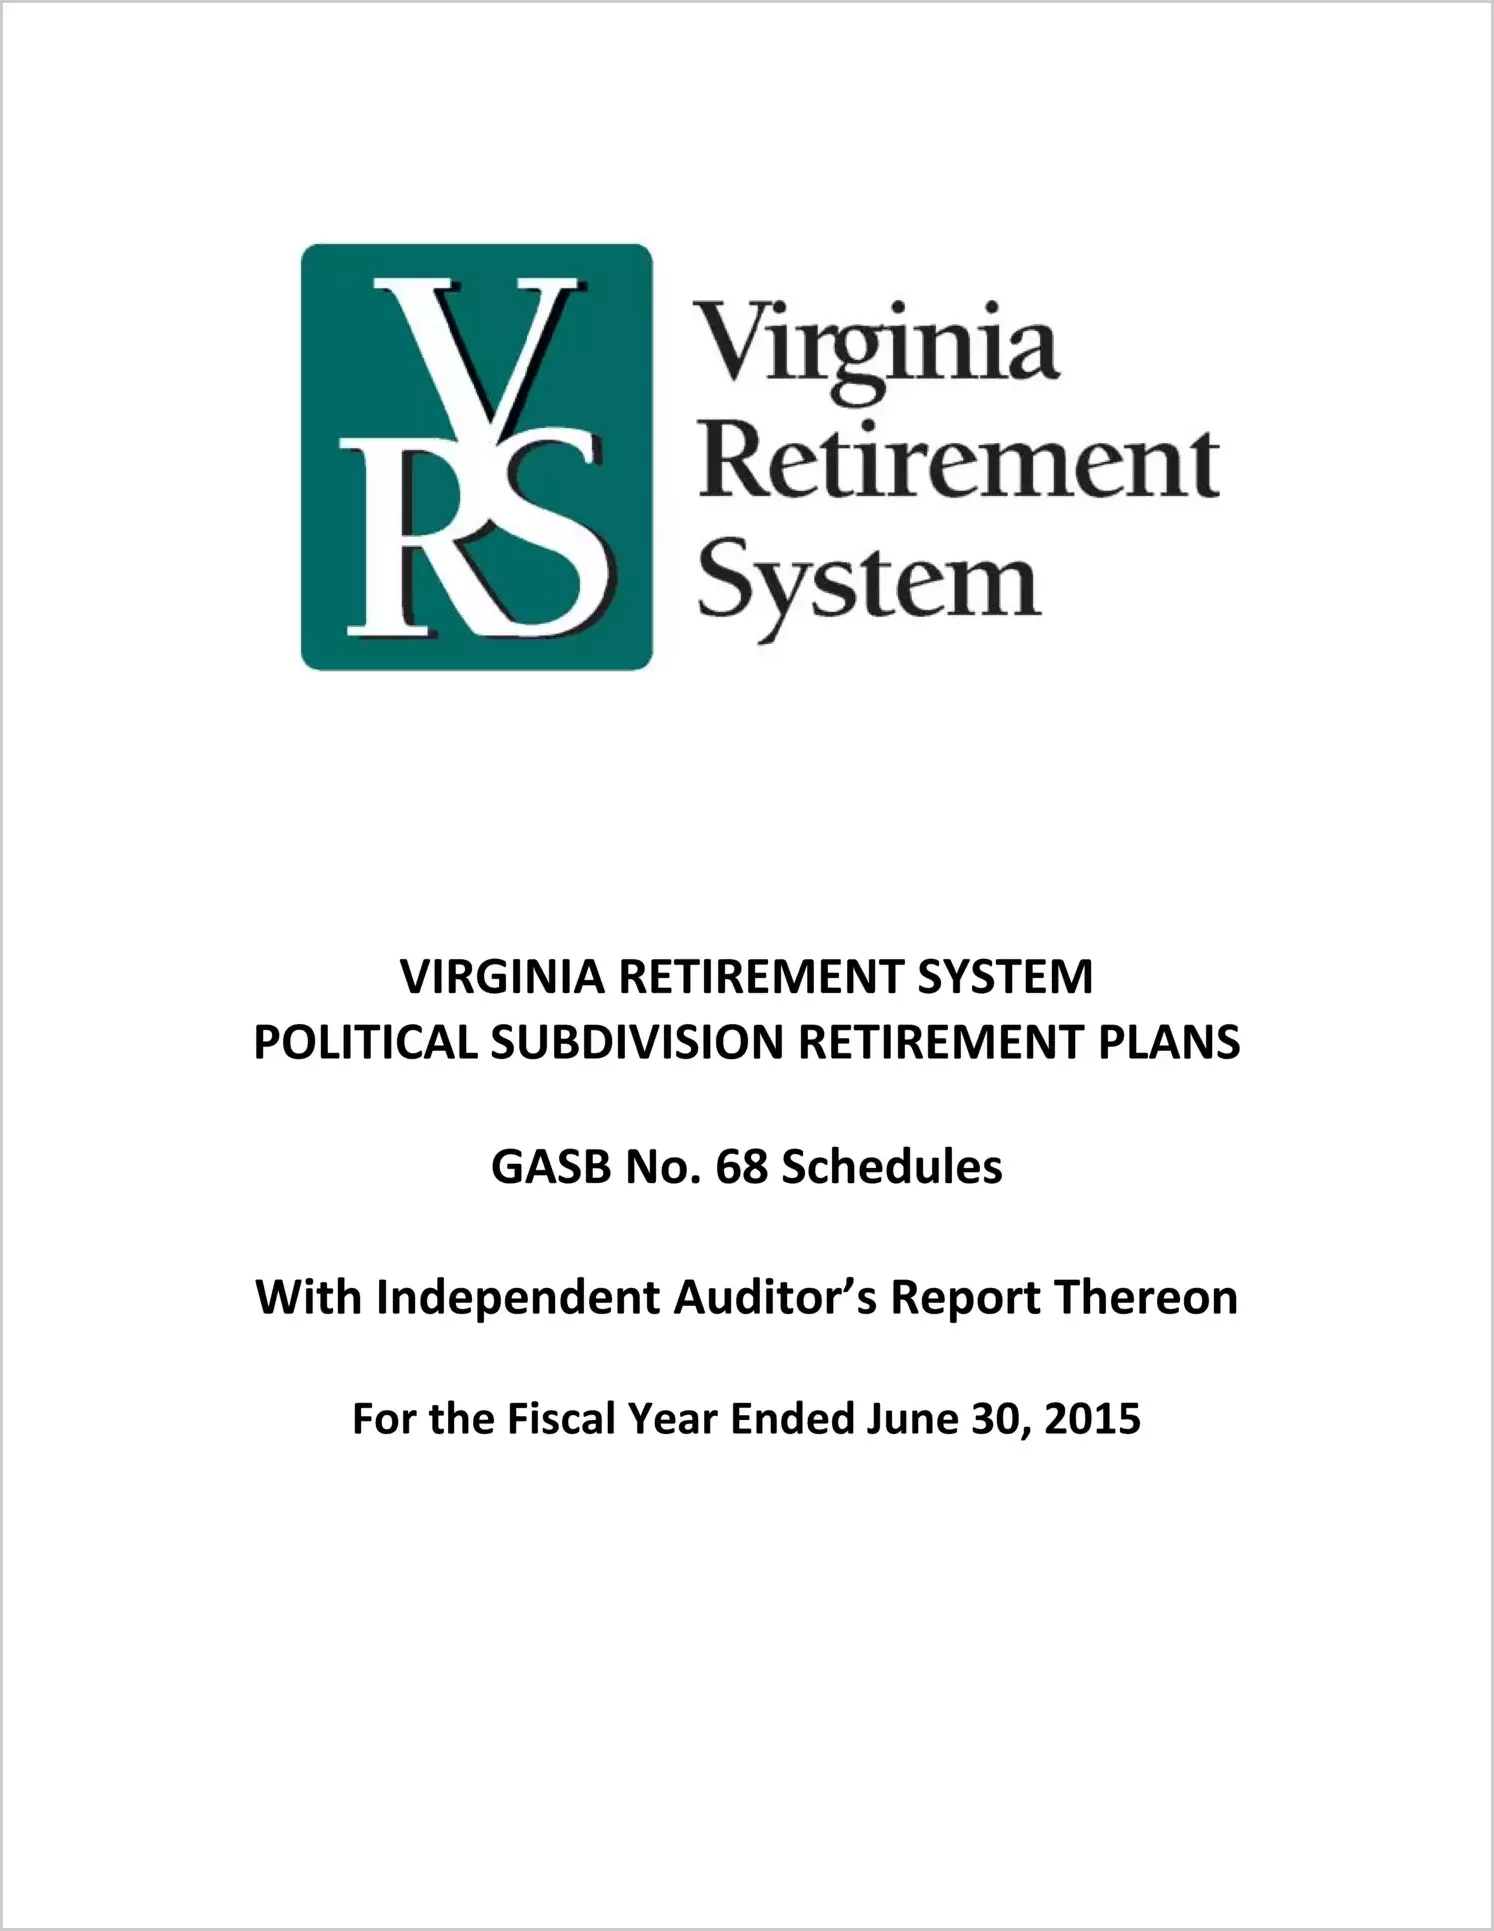 GASB 68 Schedule of Employer Pension Data - Political Subdivisions for the year ended June 30, 2015